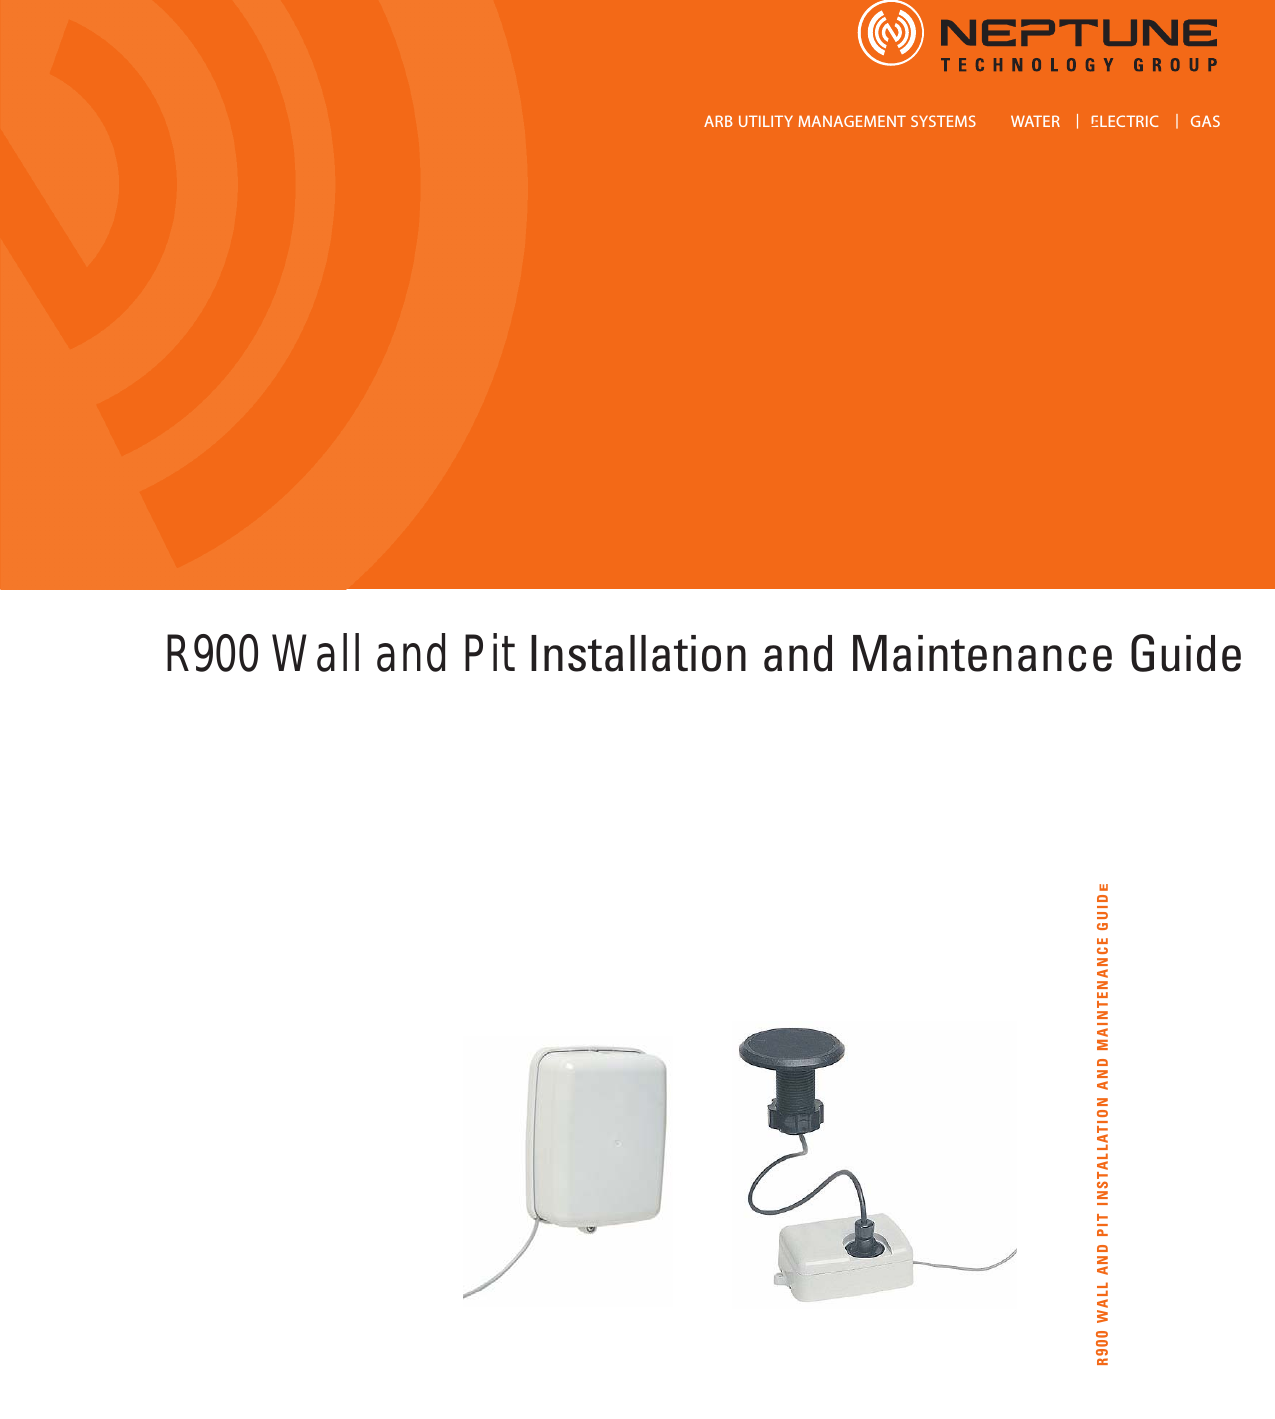                              ARB UTILITY MANAGEMENT SYSTEMS        WATER |ELECTRIC  |GASE-Cod   R900 WALL AND PIT INSTALLATION AND MAINTENANCE GUIDER900 Wall and Pit Installation and Maintenance Guide